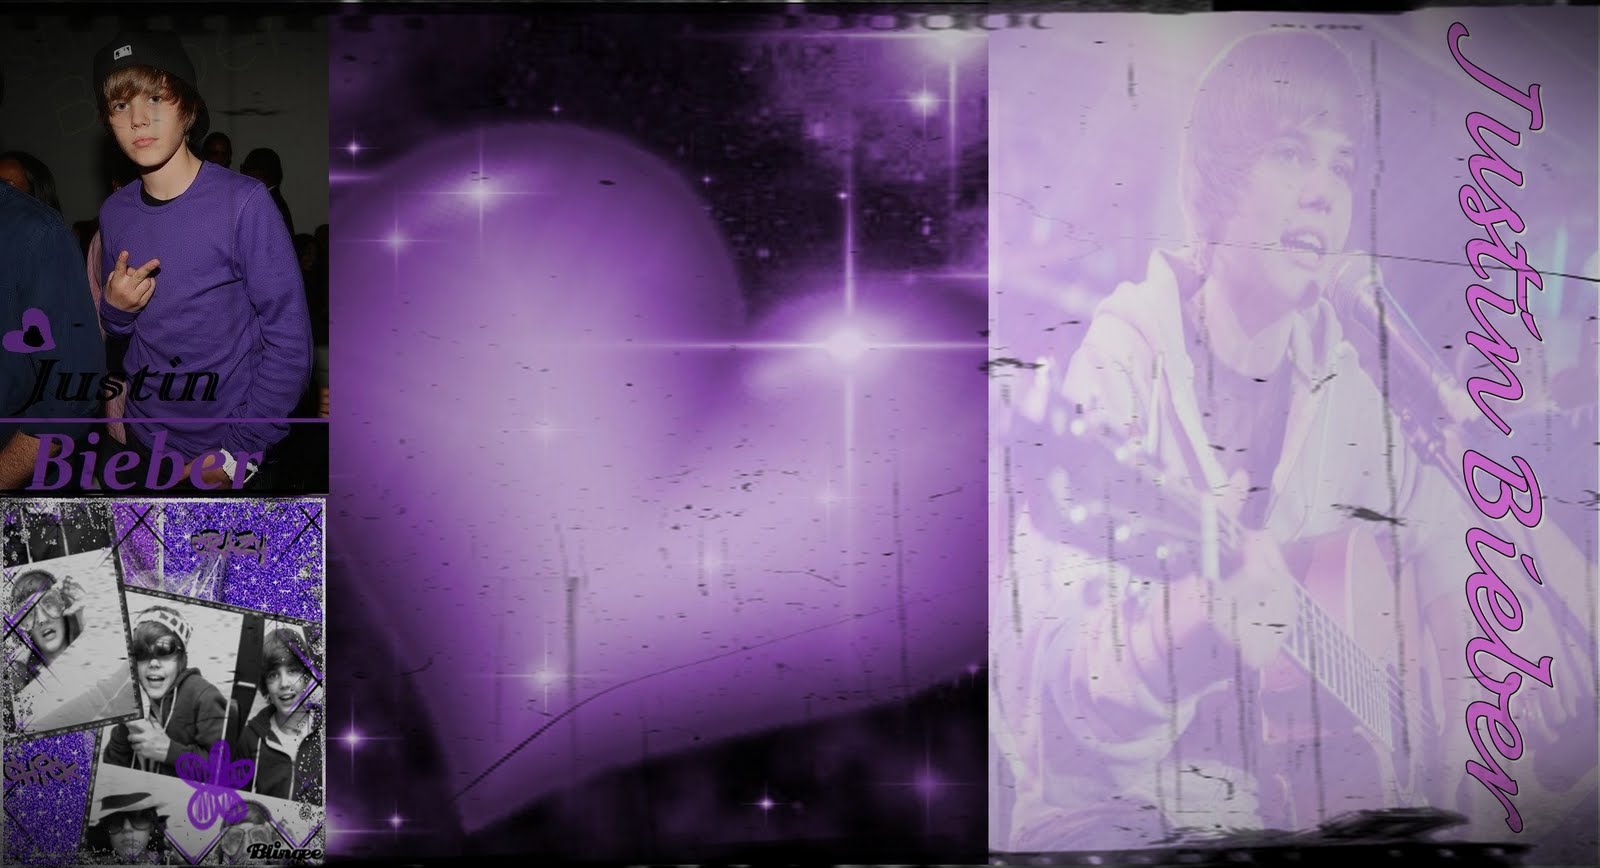  justin bieber backgrounds justin loves wearing purple and i love